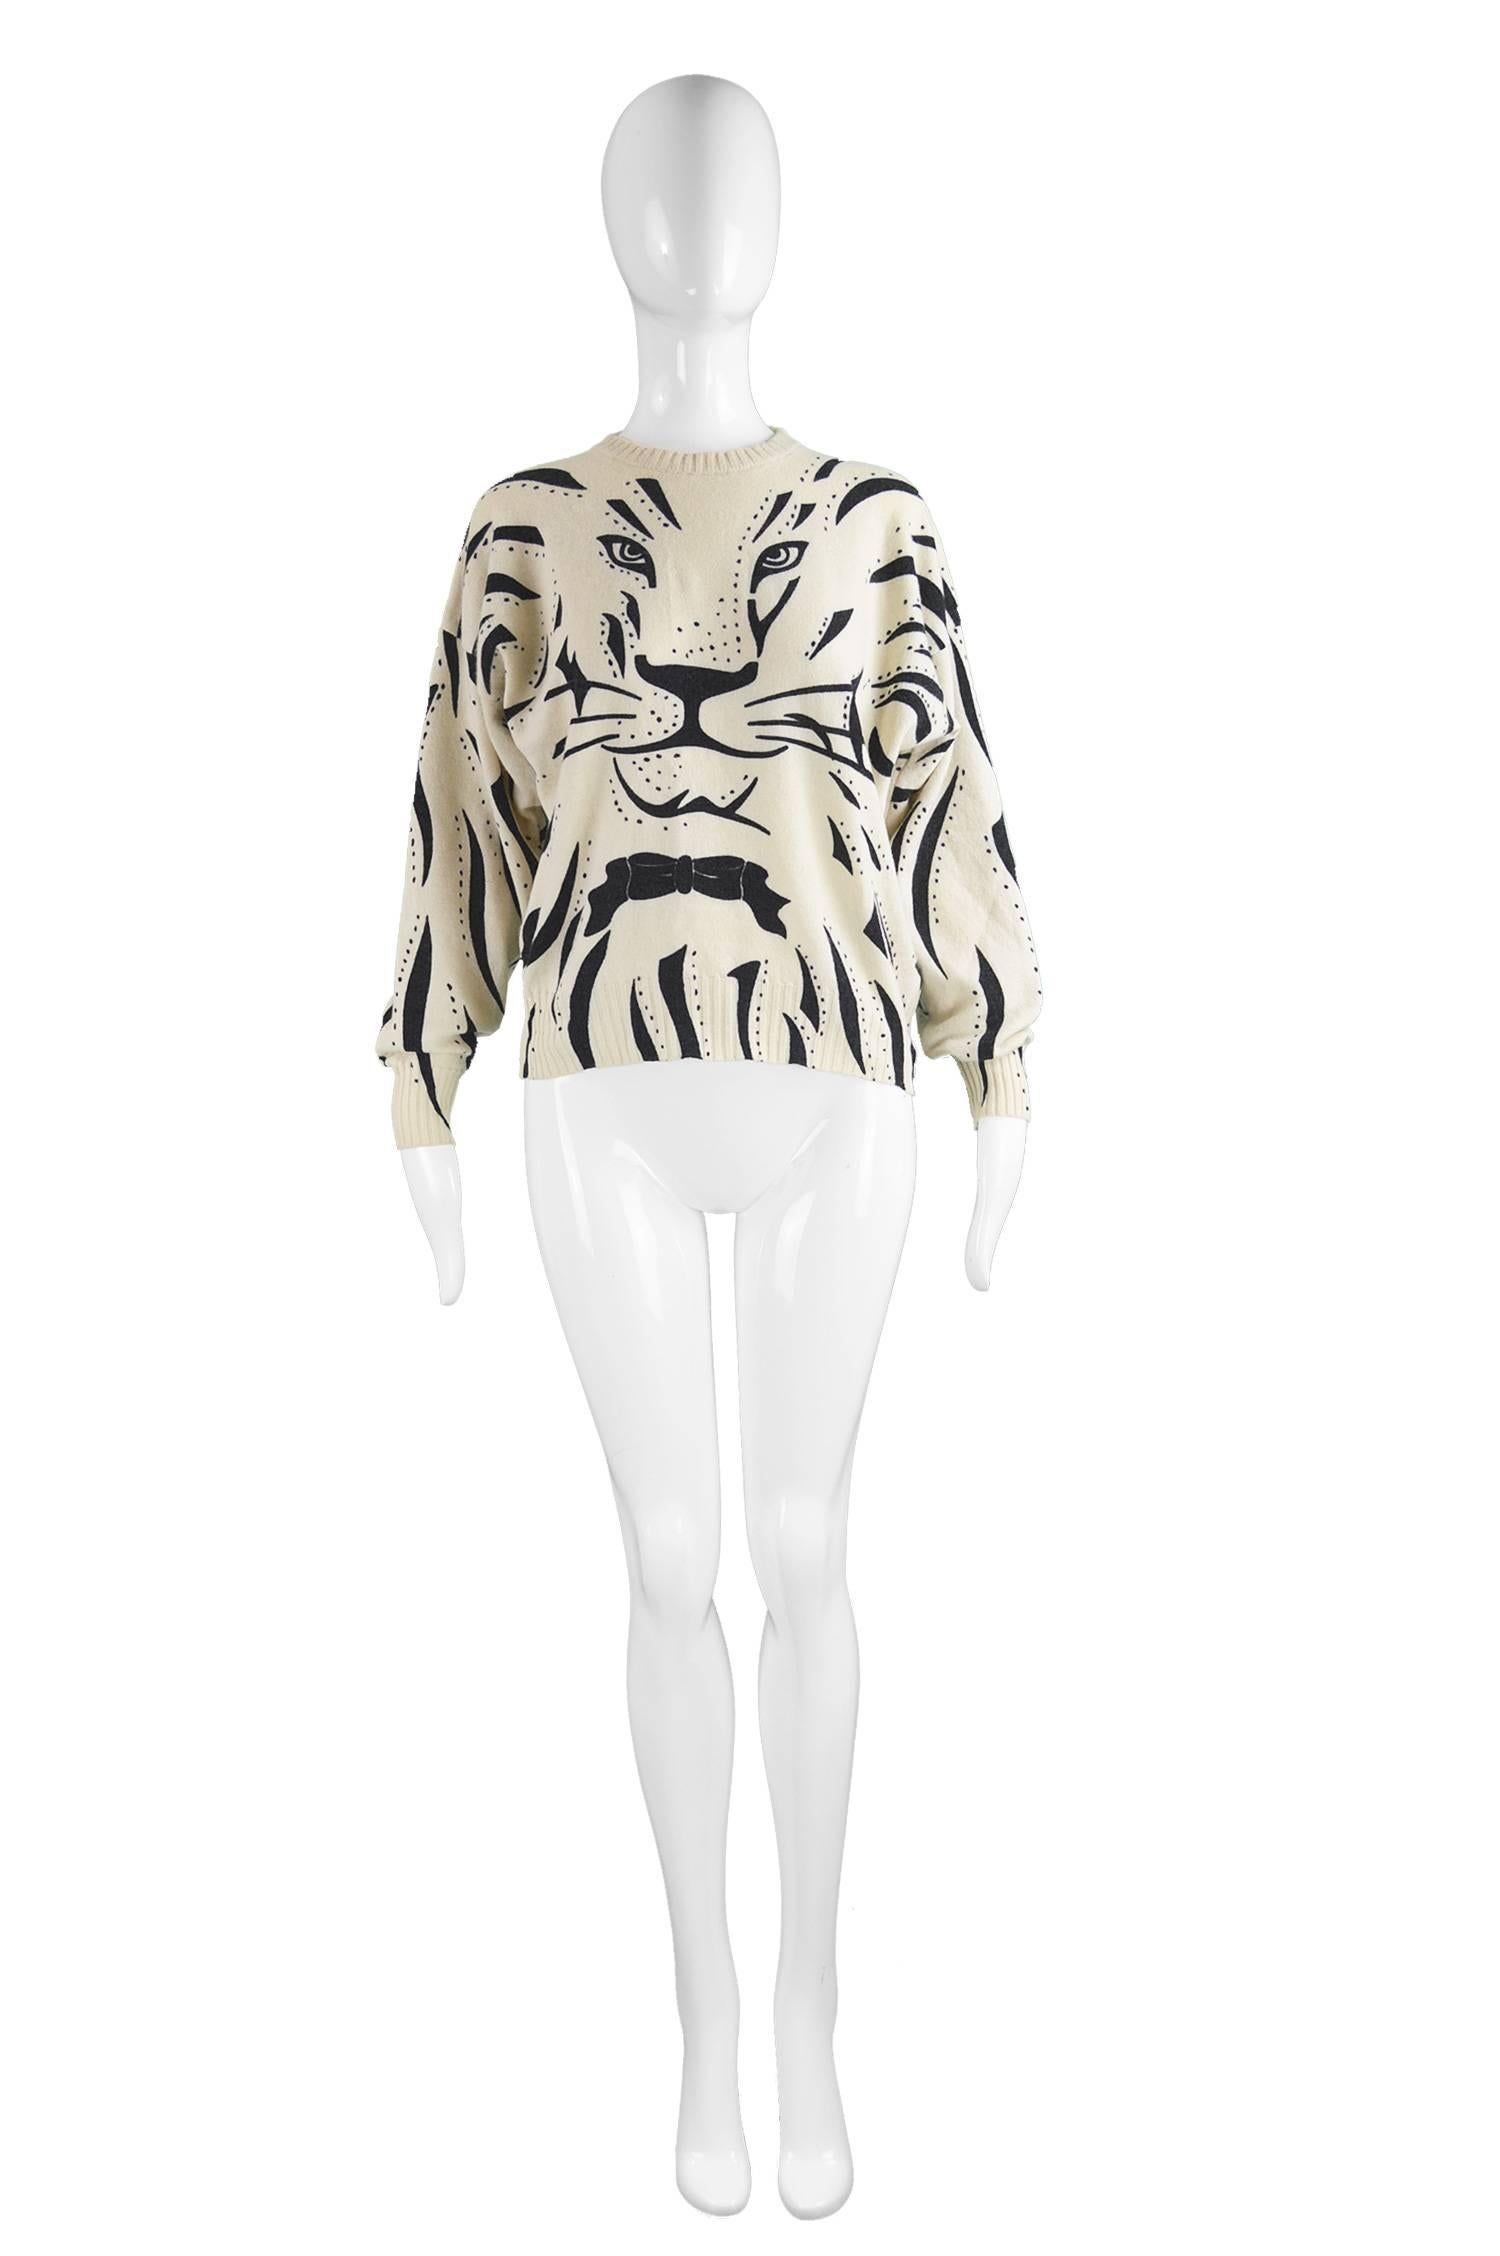 Krizia Iconic 'Animal Series' Cream Wool Tiger Face Sweater, 1980s

Estimated Size: Women's Small to Medium but this gives a slouchy, oversized fit.
Bust - up to 44” / 112cm
Length (Shoulder to Hem) - 22”  / 56cm
Note: Item has stretch so there is